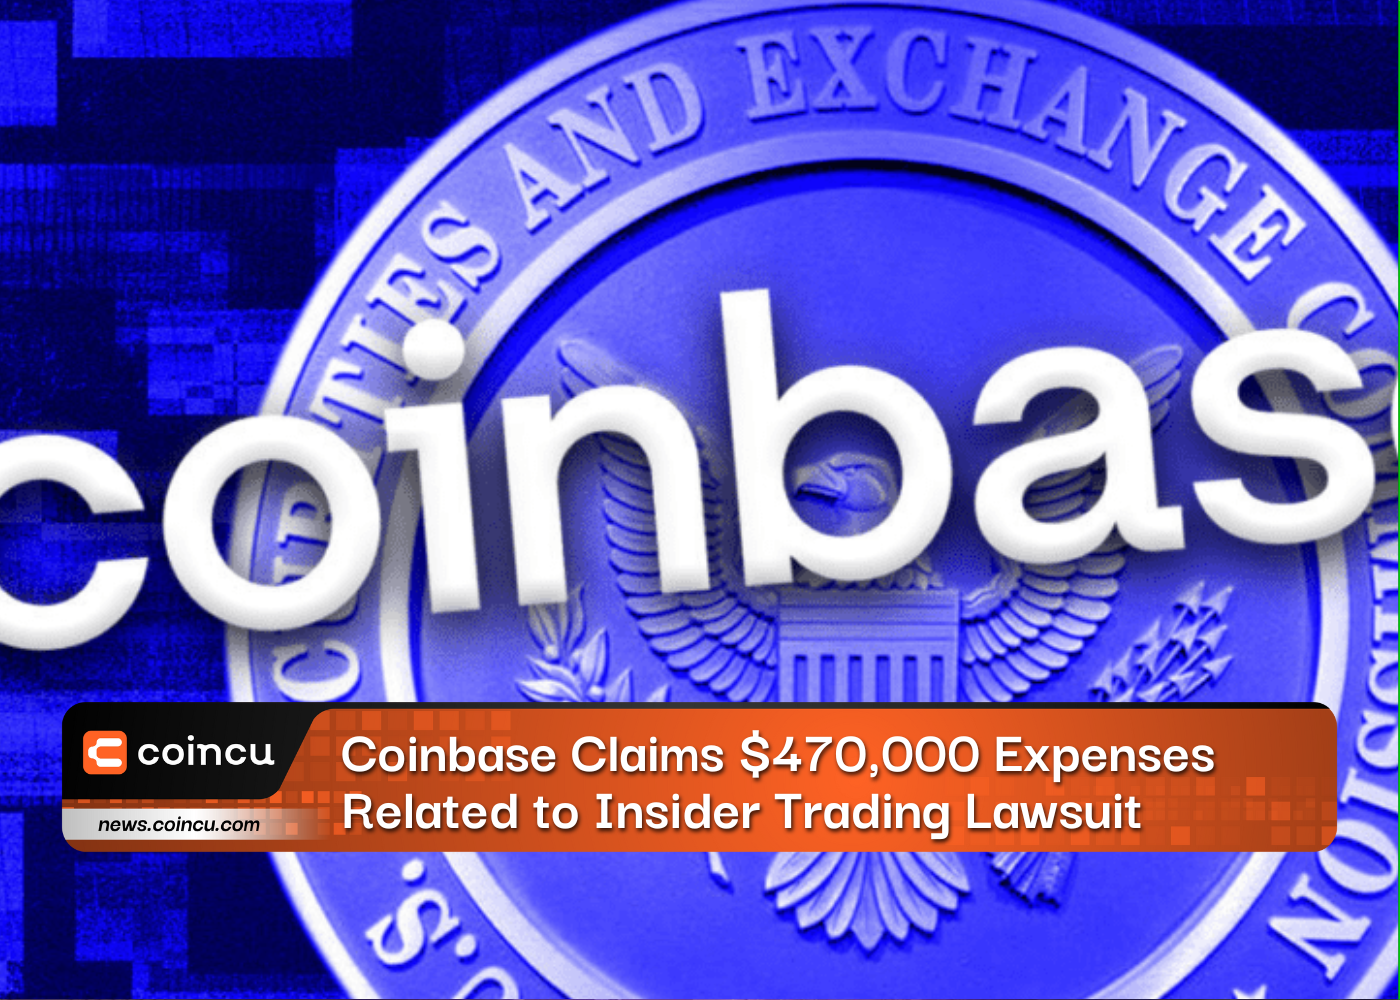 Coinbase Claims $470,000 Expenses Related to Insider Trading Lawsuit